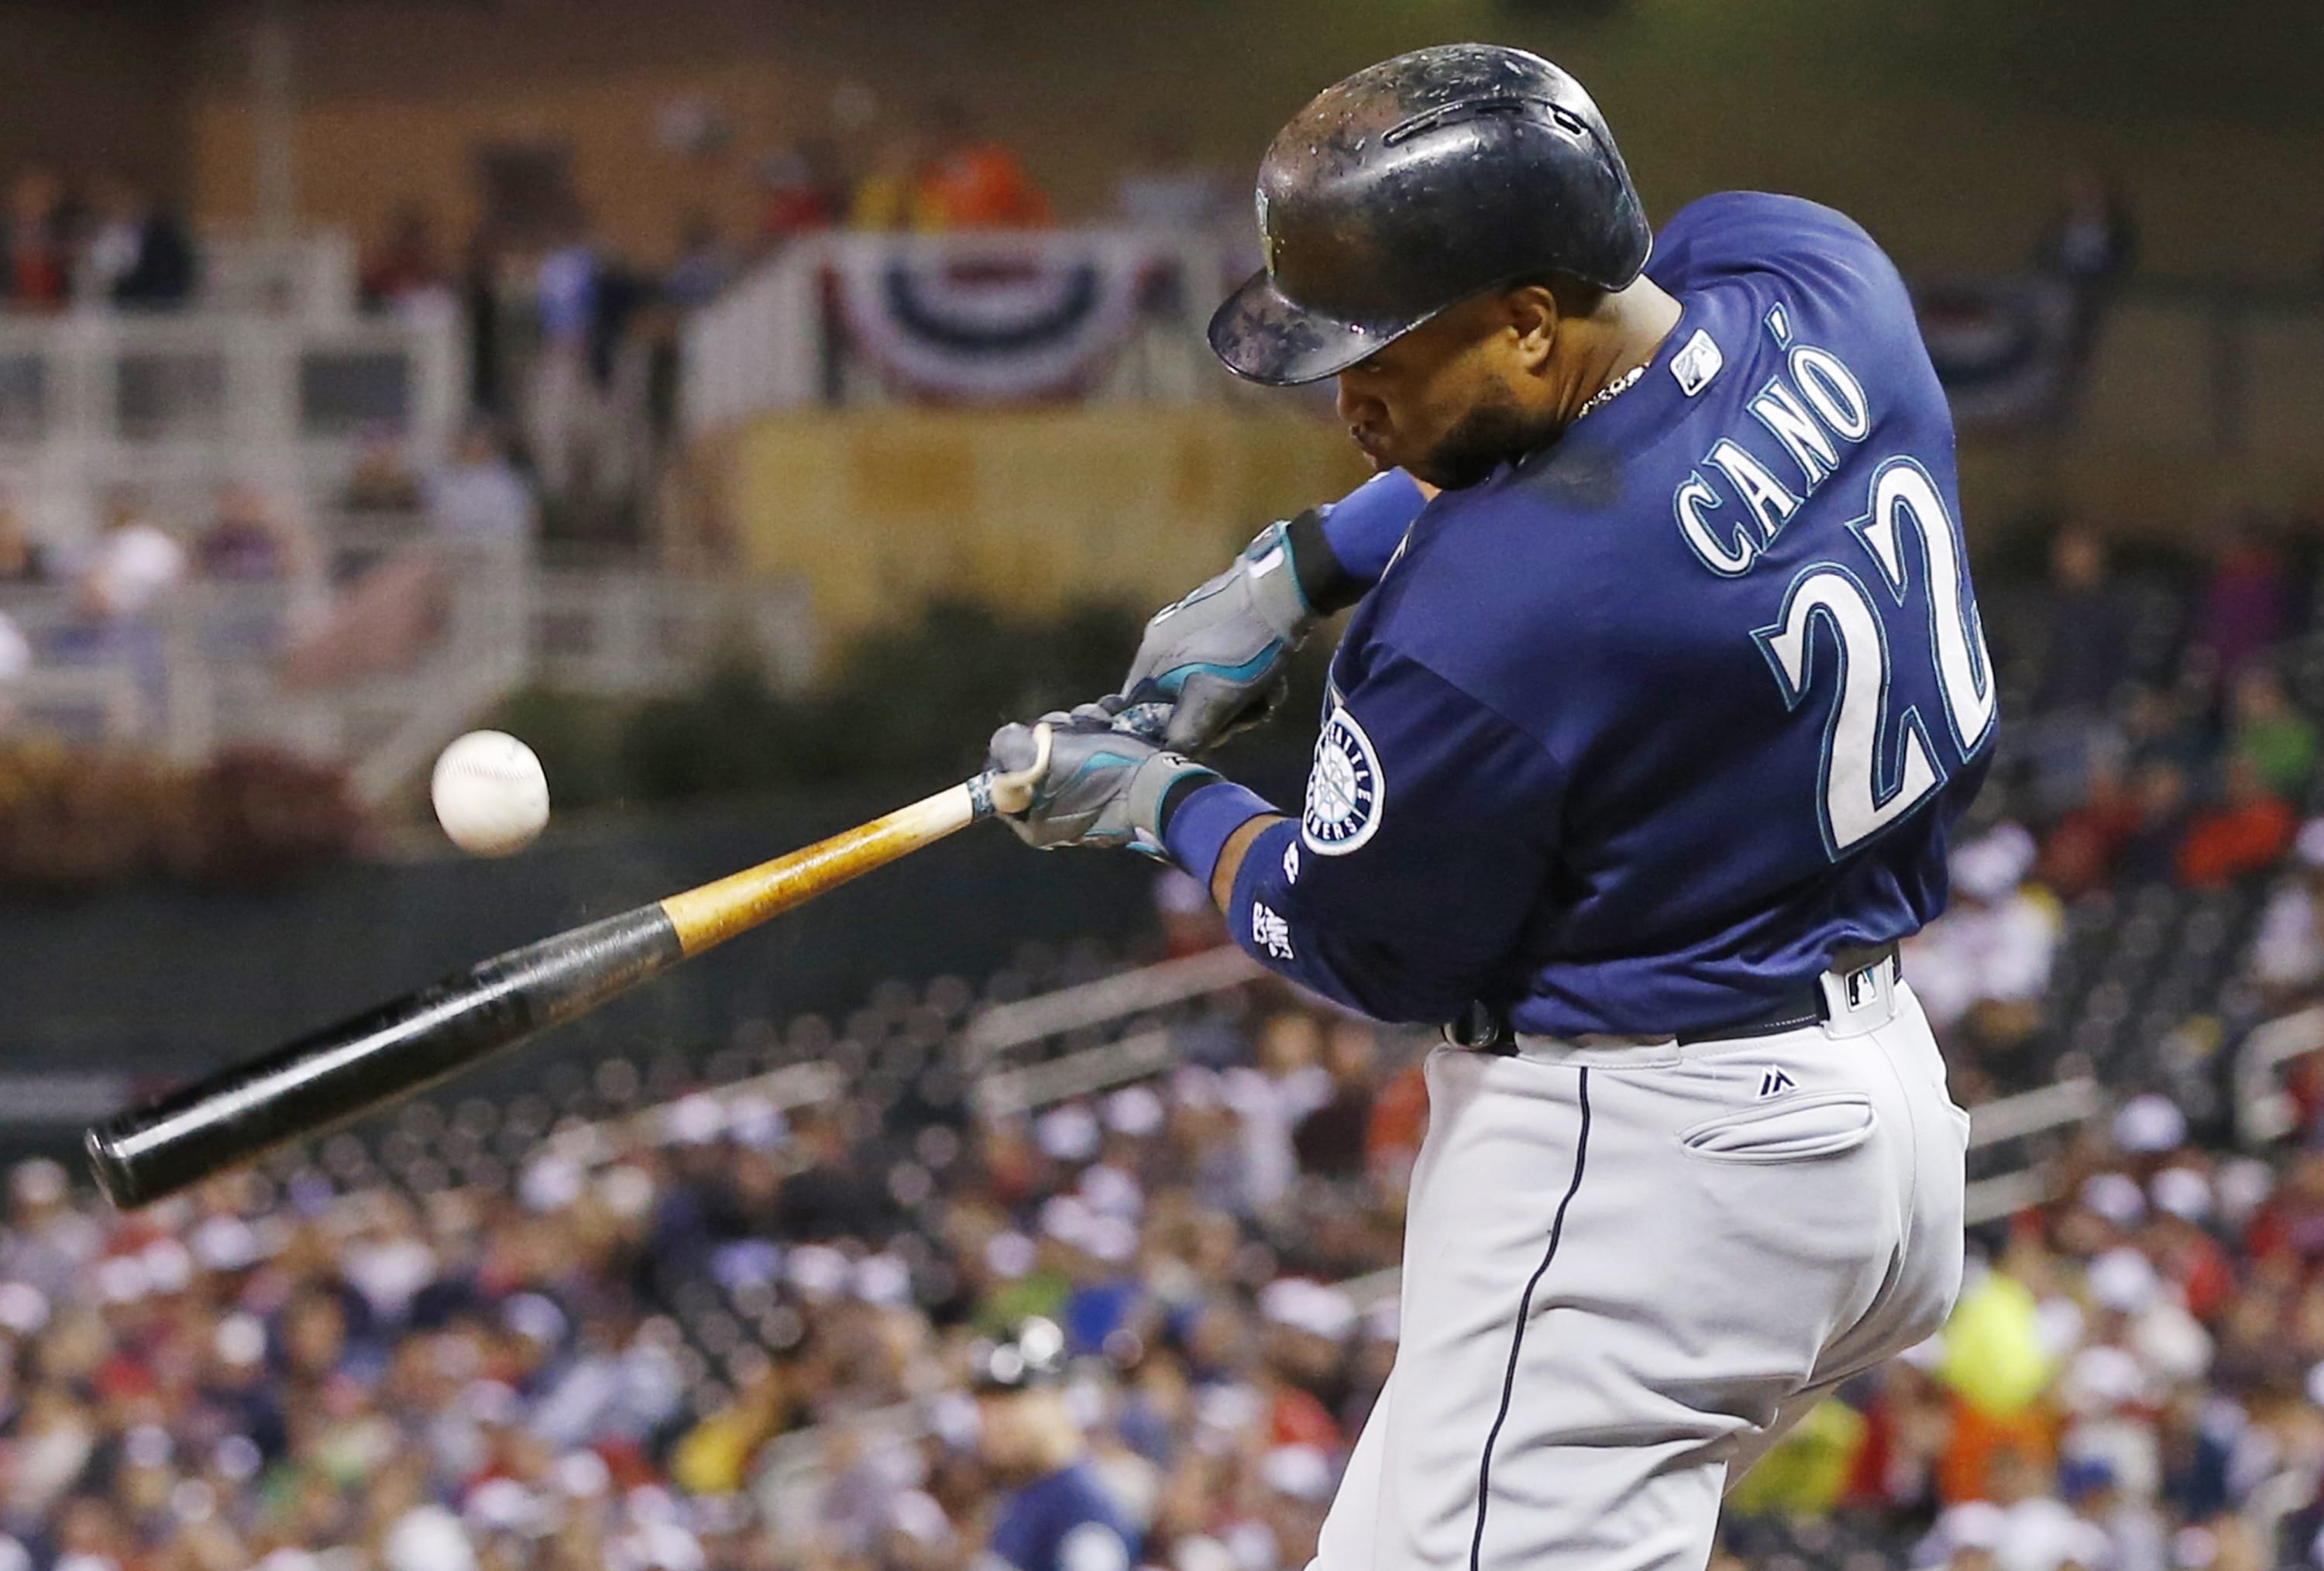 Seattle Mariners' Robinson Cano hits an RBI single off Minnesota Twins pitcher Kyle Gibson during the third inning of a baseball game Friday, Sept. 23, 2016, in Minneapolis.